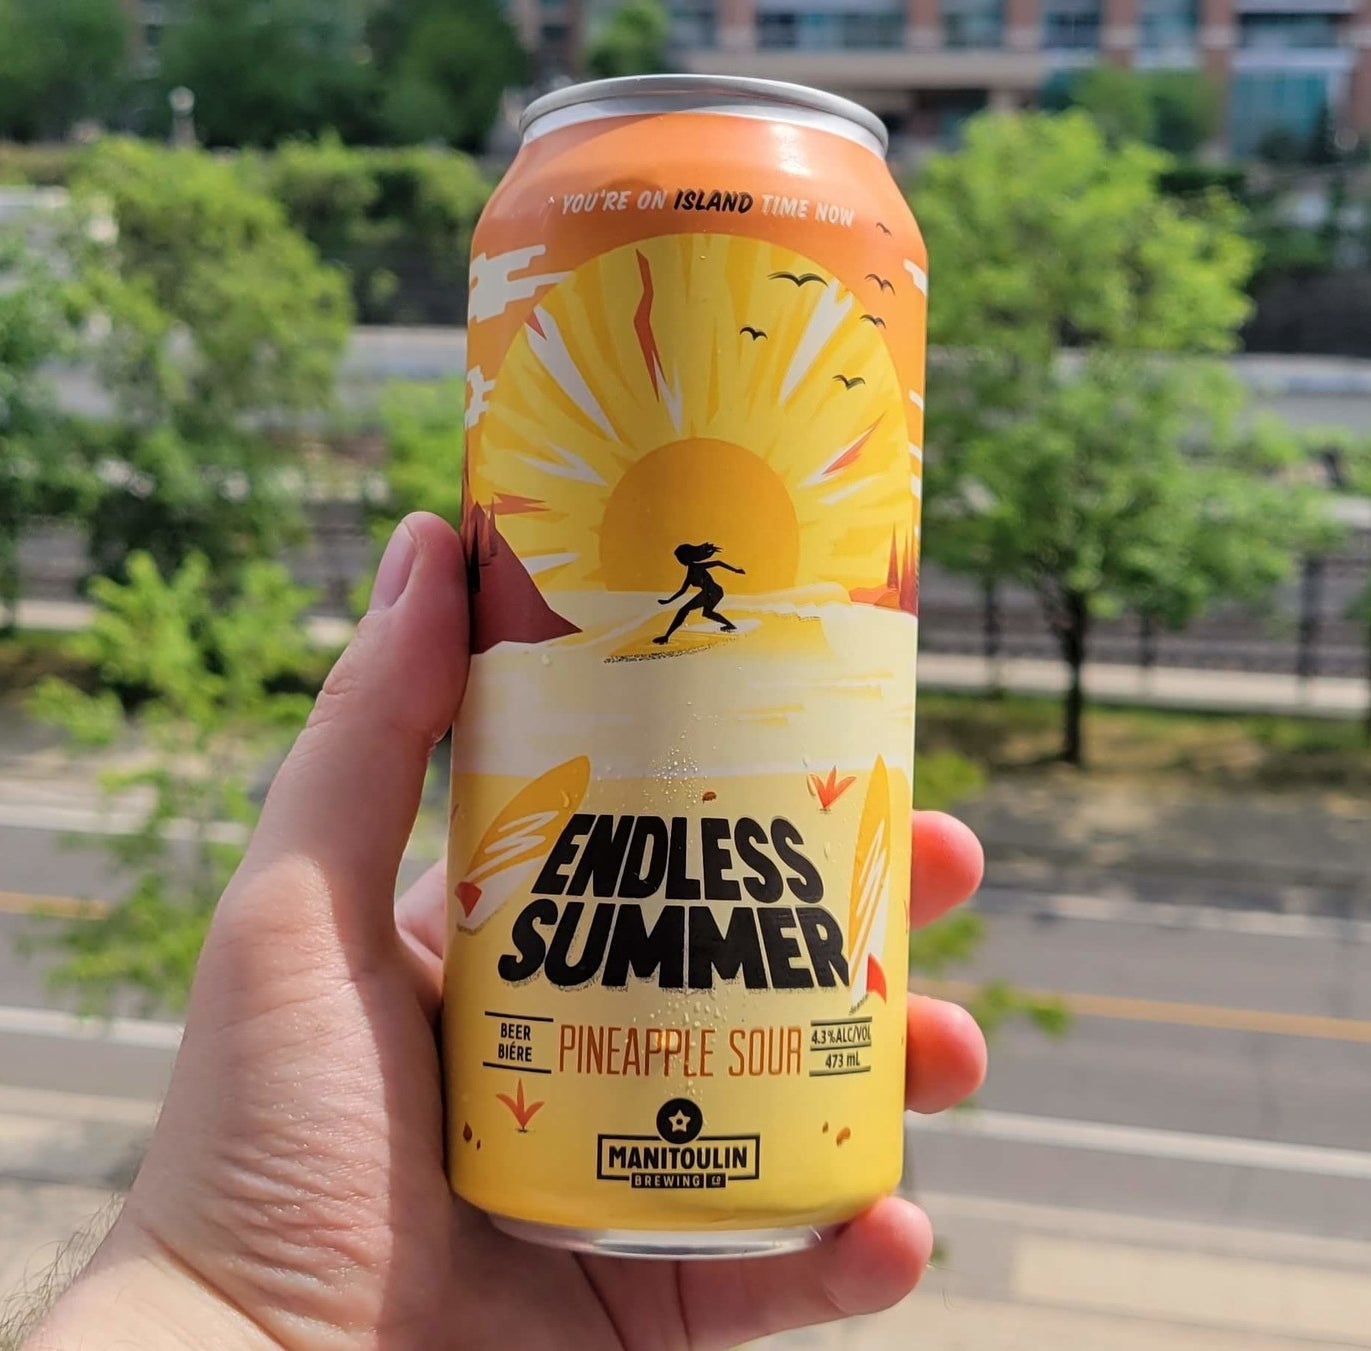 A can of Endless Summer being held in a hand.